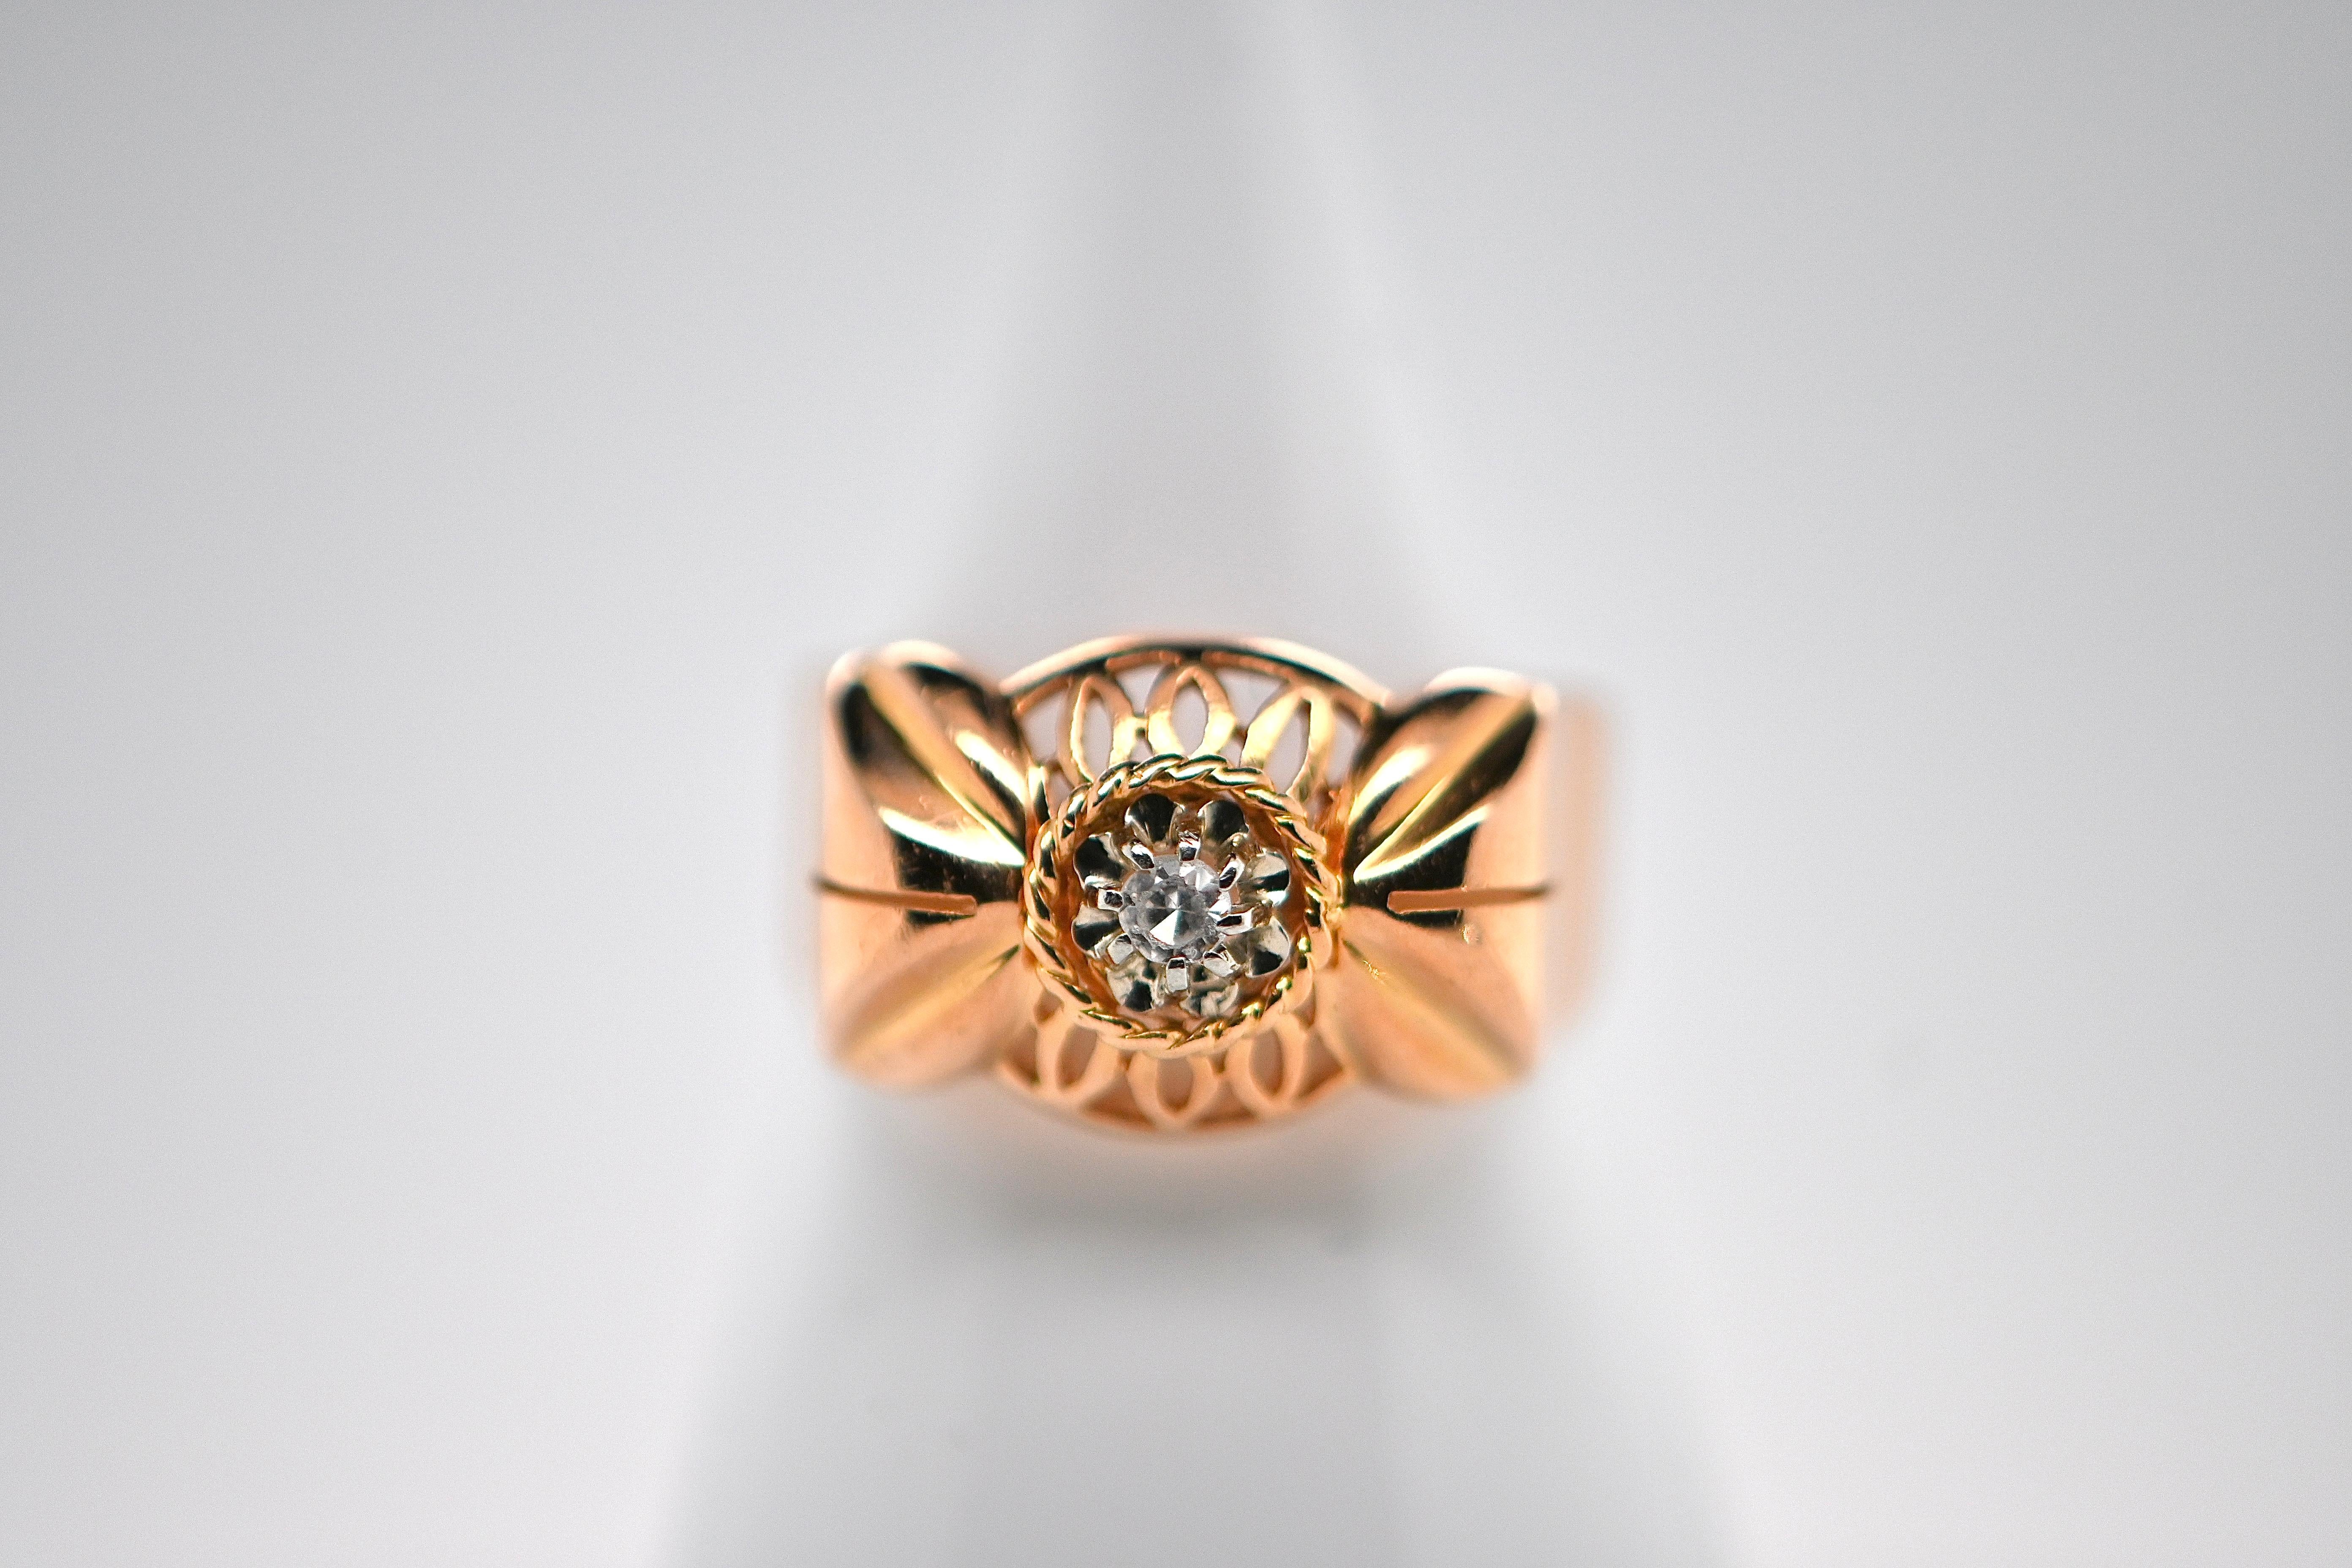 Discover this magnificent retro ring, a true treasure from the Art Deco era of the 1950s. With its timeless design and captivating aesthetic, this ring embodies the elegance and refinement of the era's iconic art movement.

Handcrafted with